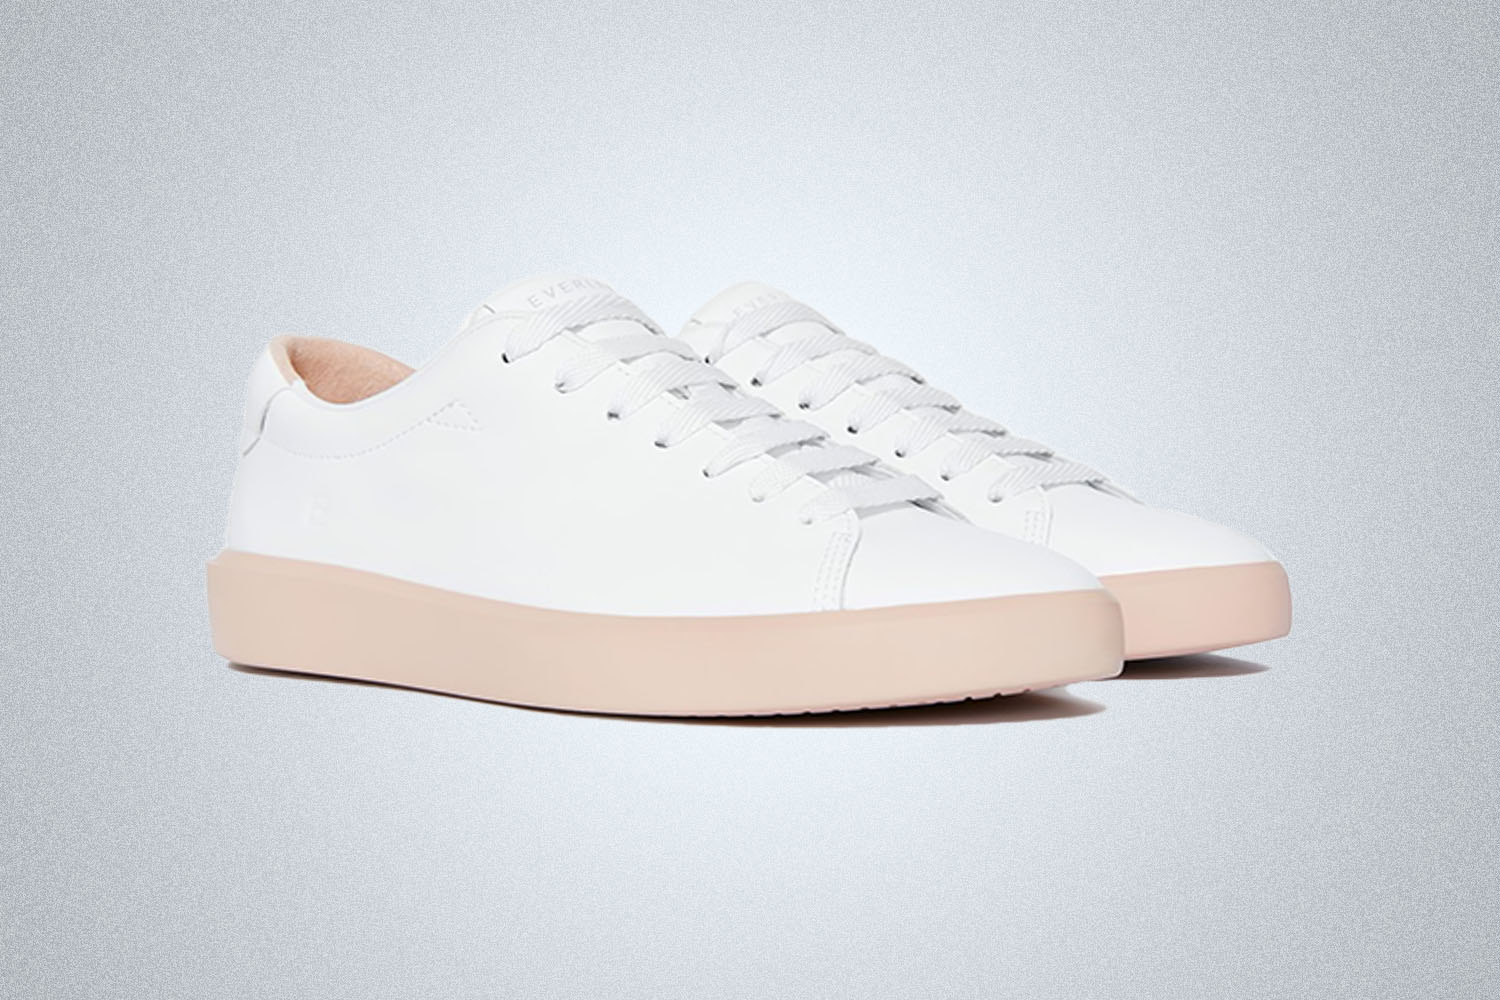 An Everlane pair of sneakers on a grey background